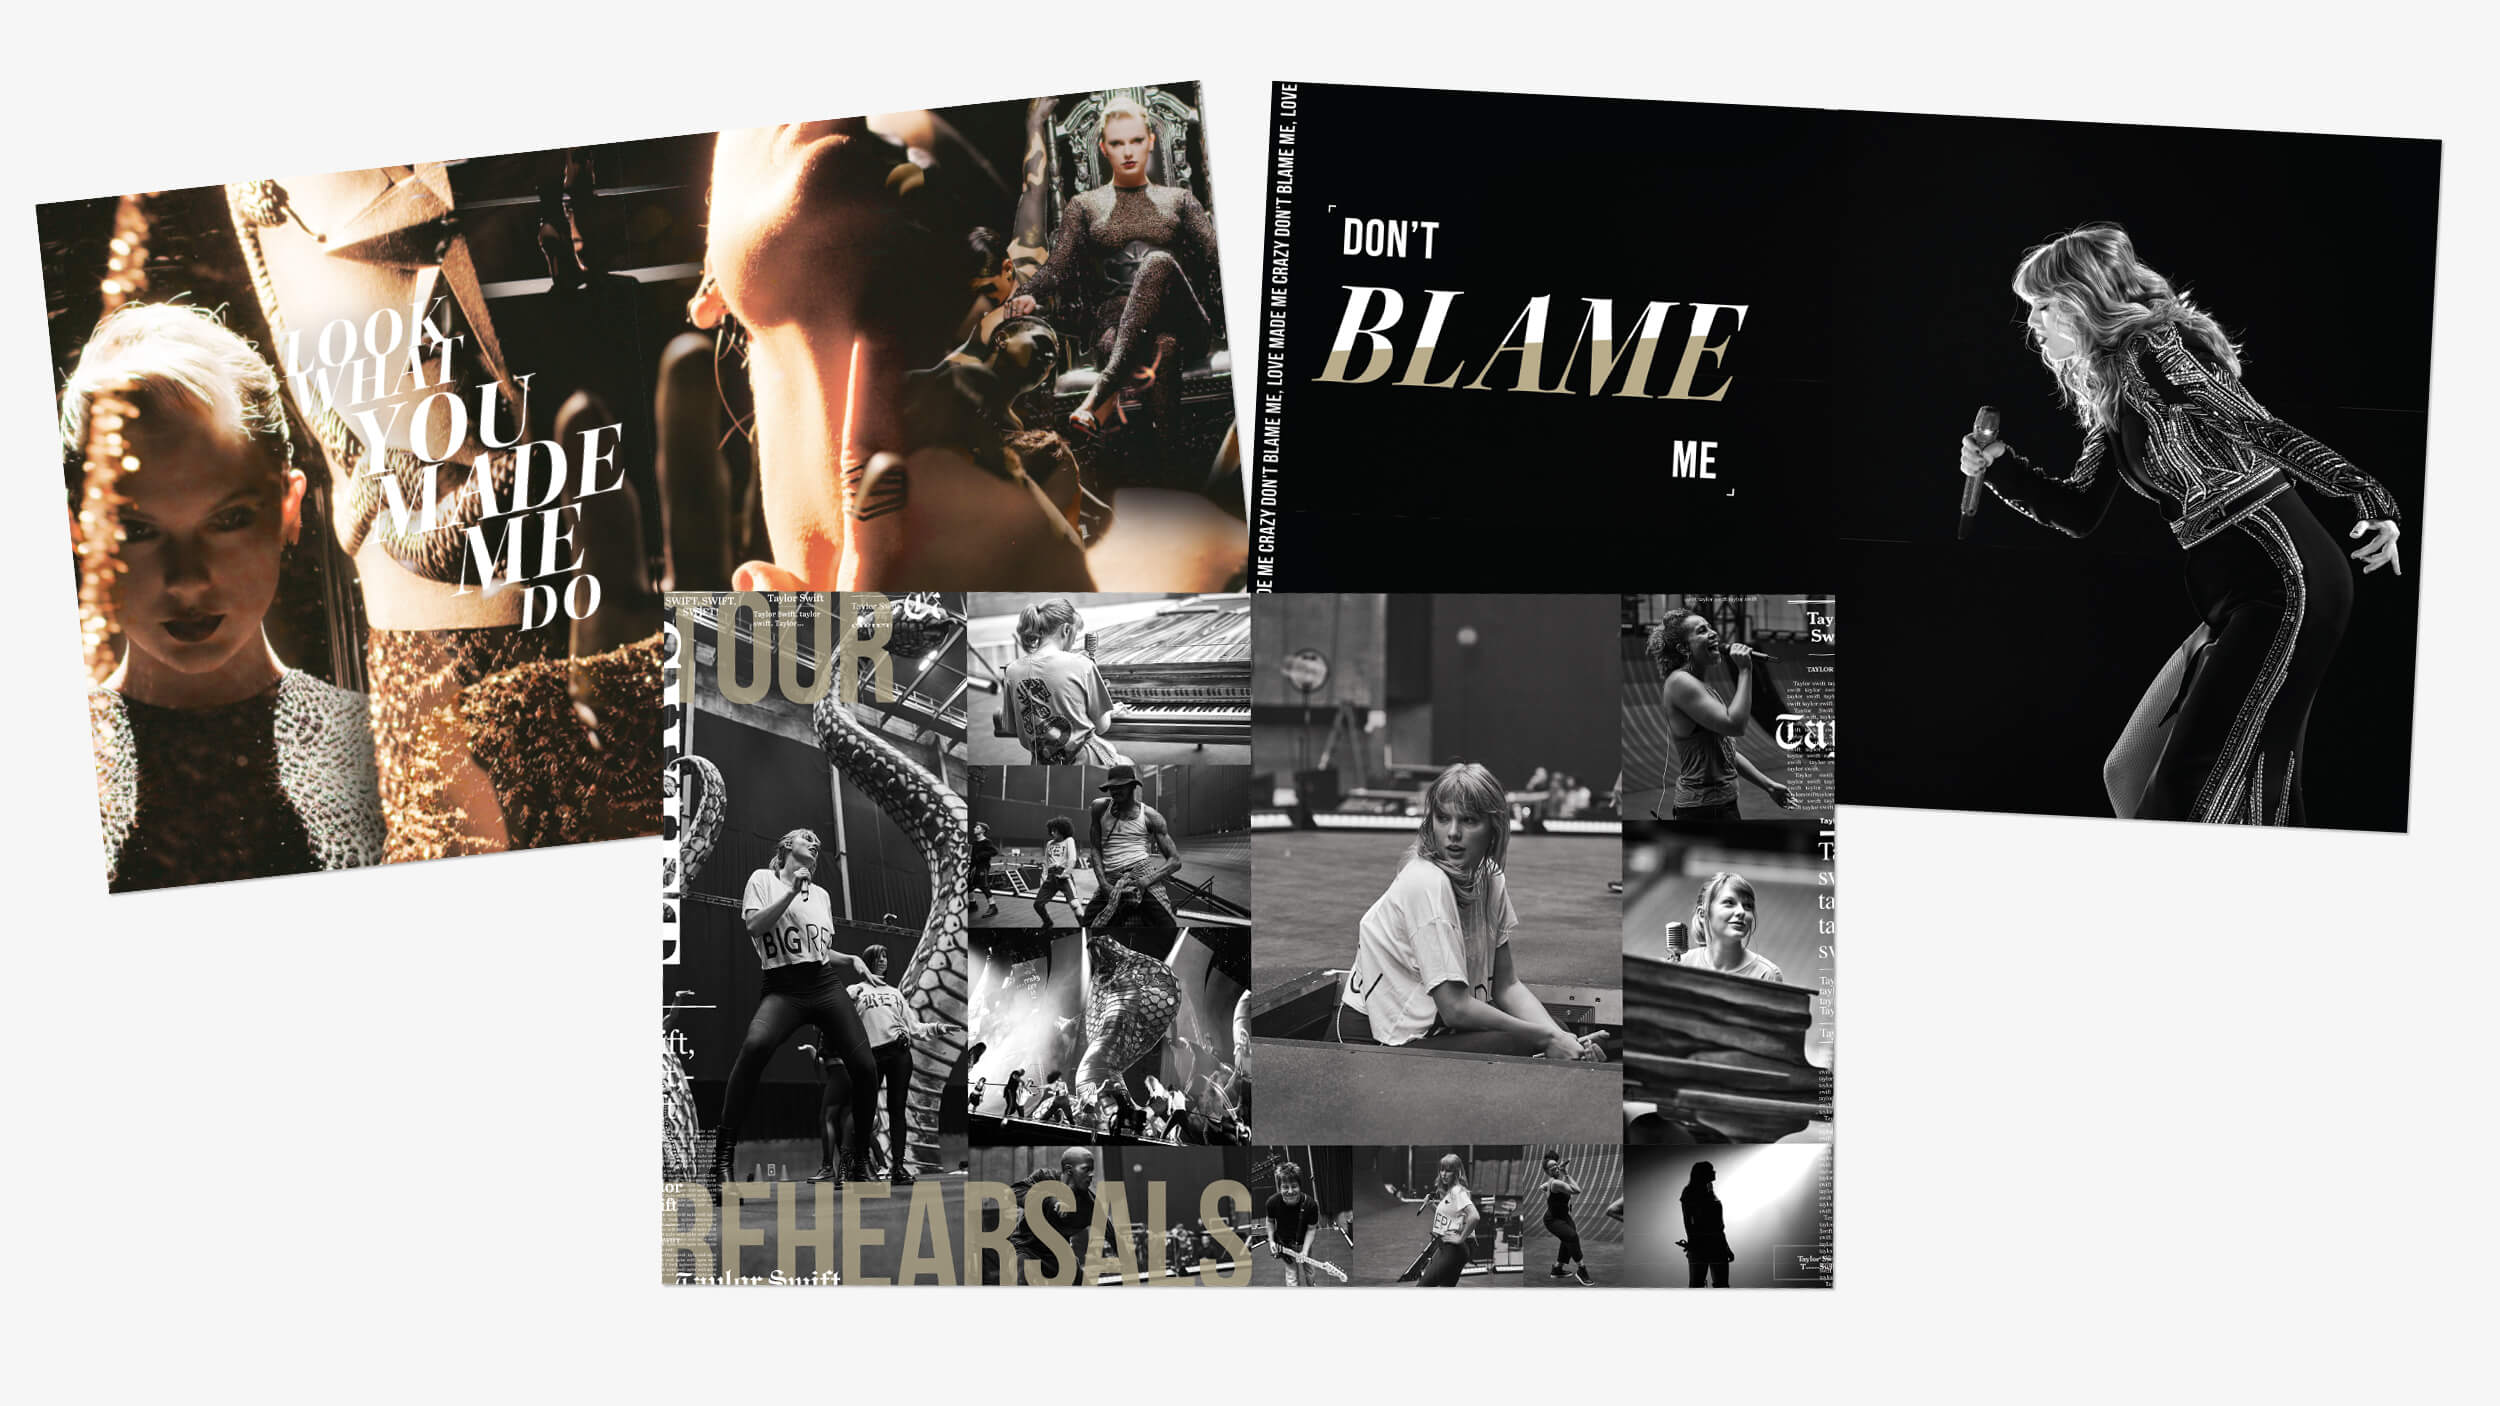 Taylor Swift reputation Tour Book spreads featuring live photos, tour rehearsal photos, video footage images and Don't Blame Me lyrics